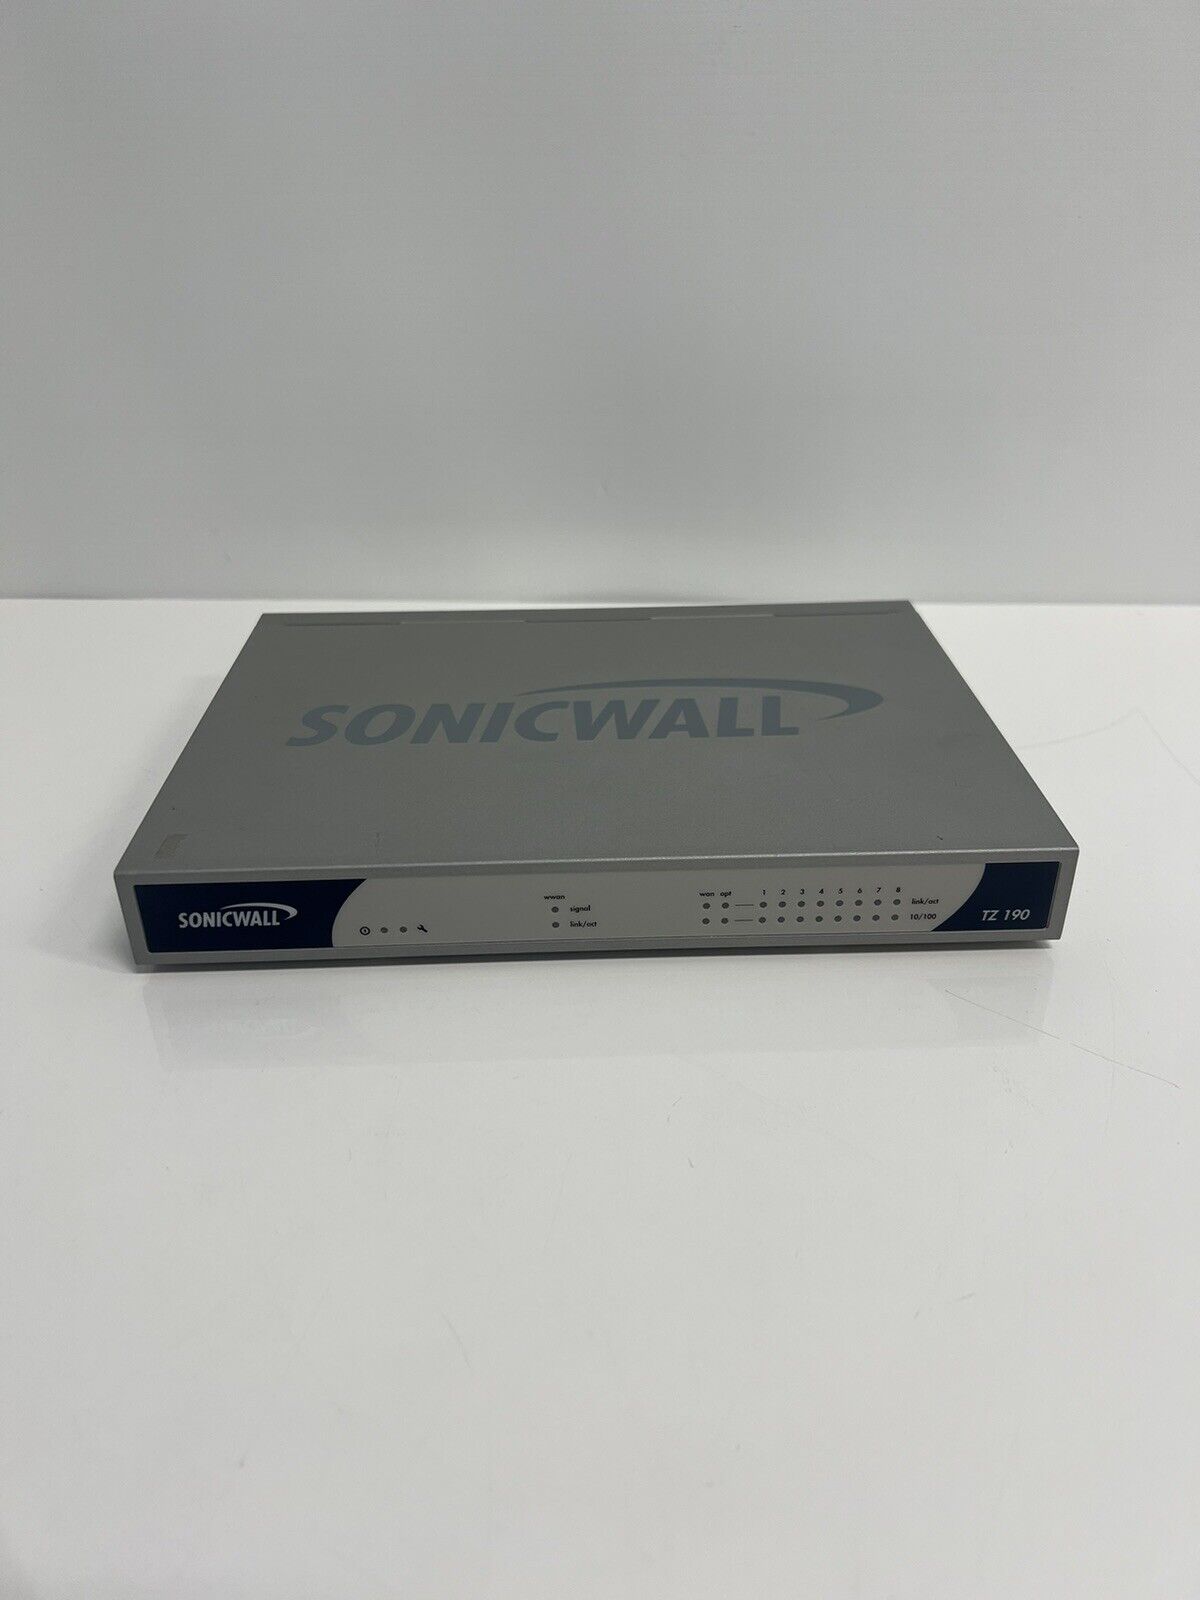 SonicWall TZ 190 Security Appliance Model APL18-045 No Power Adapter